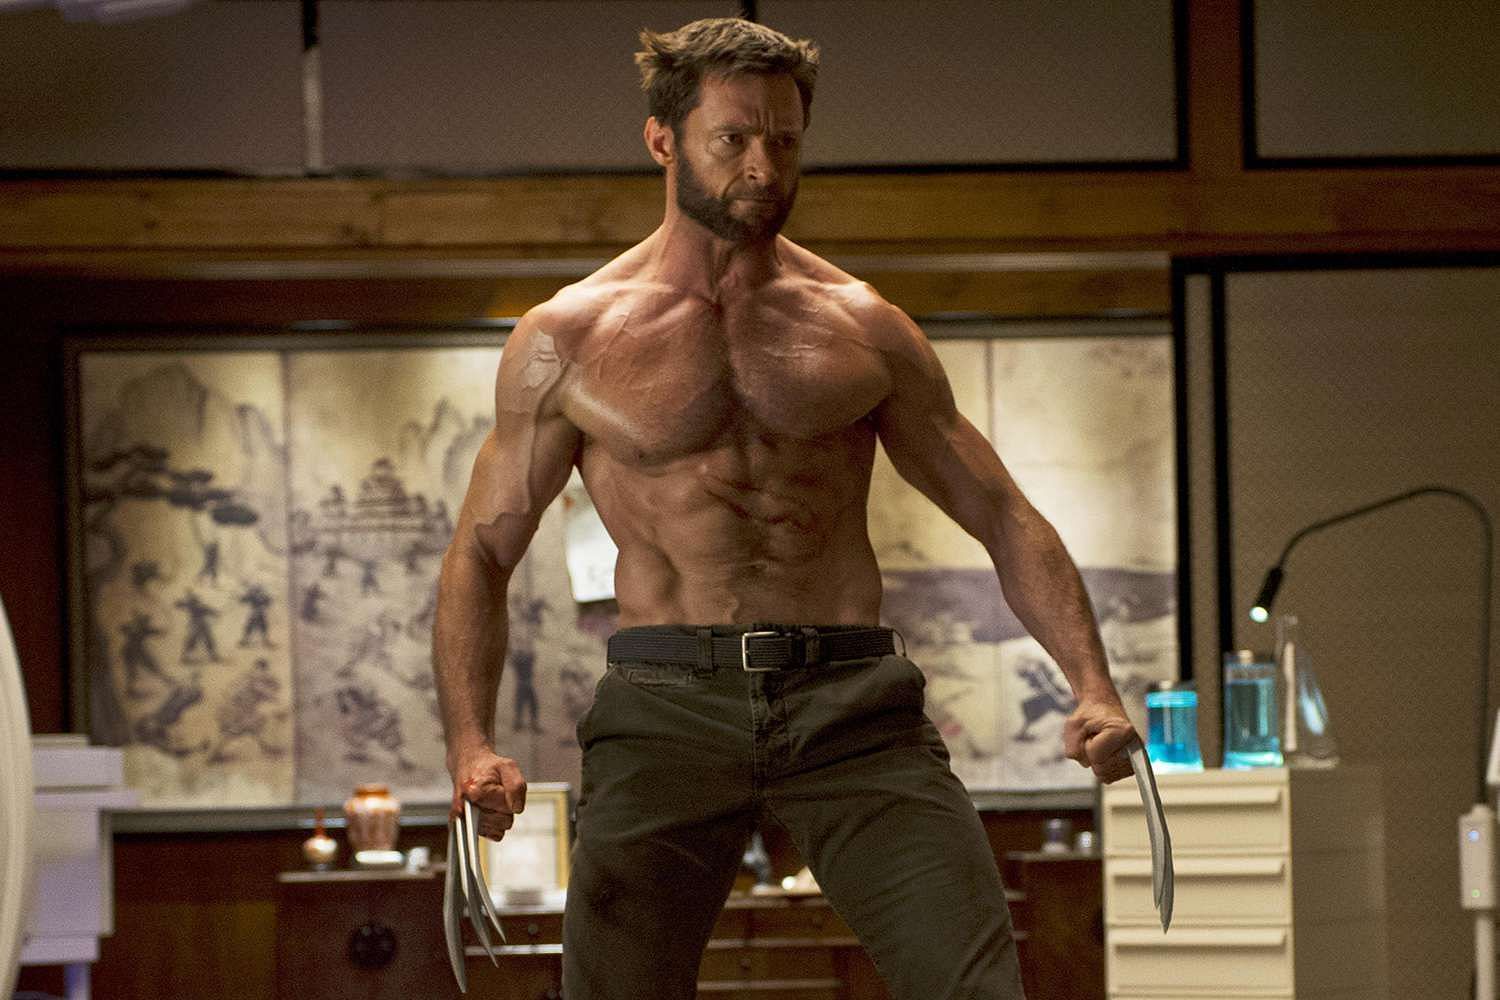 Jackman's dedication to fitness and performance takes the internet by storm (Image via 20th Century Studios)